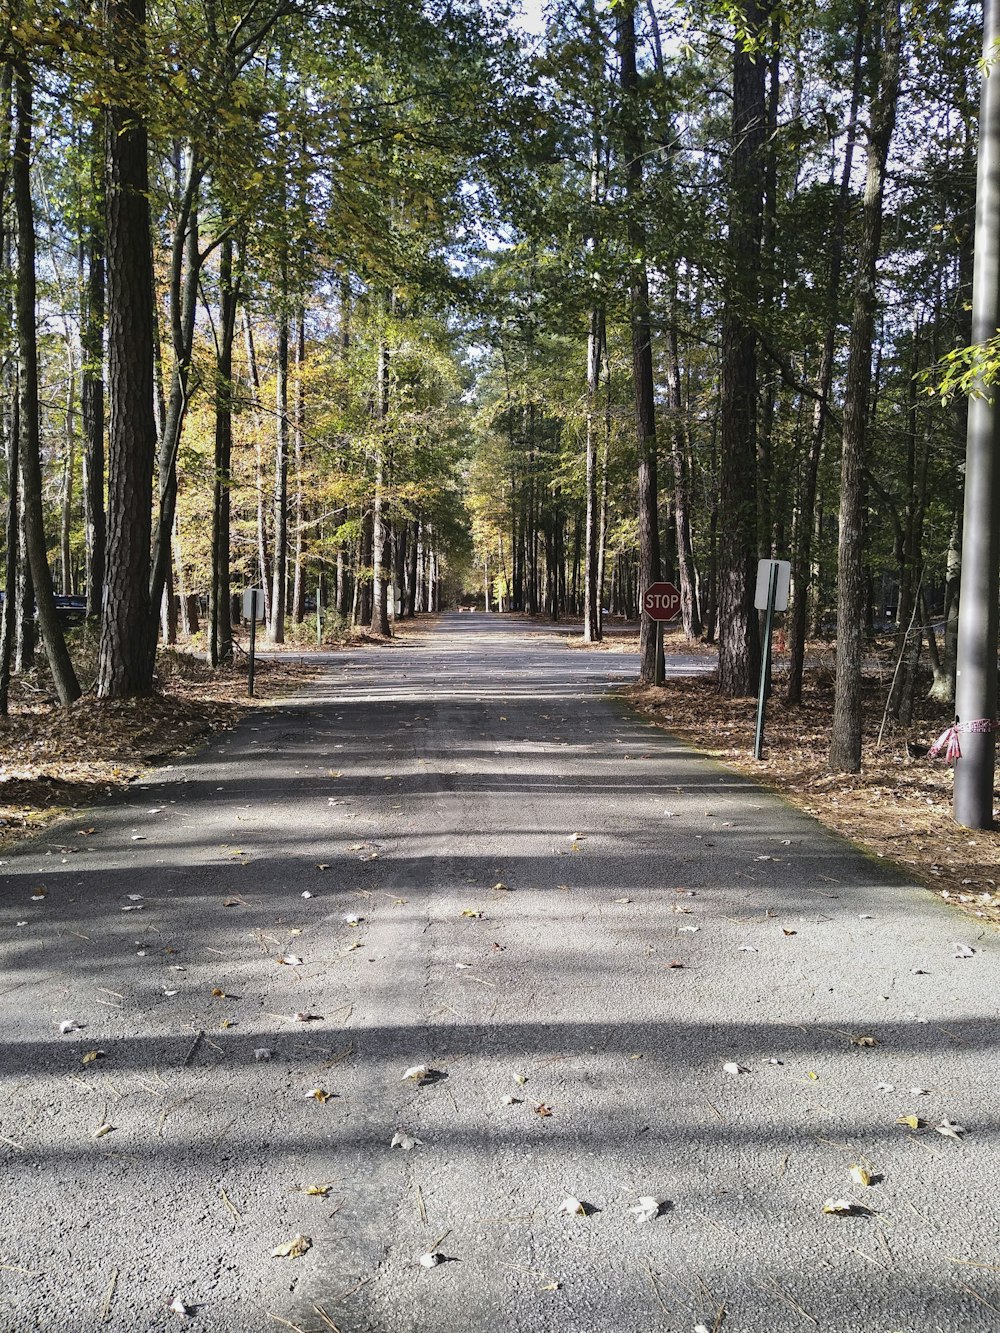 a road in the middle of a wooded area